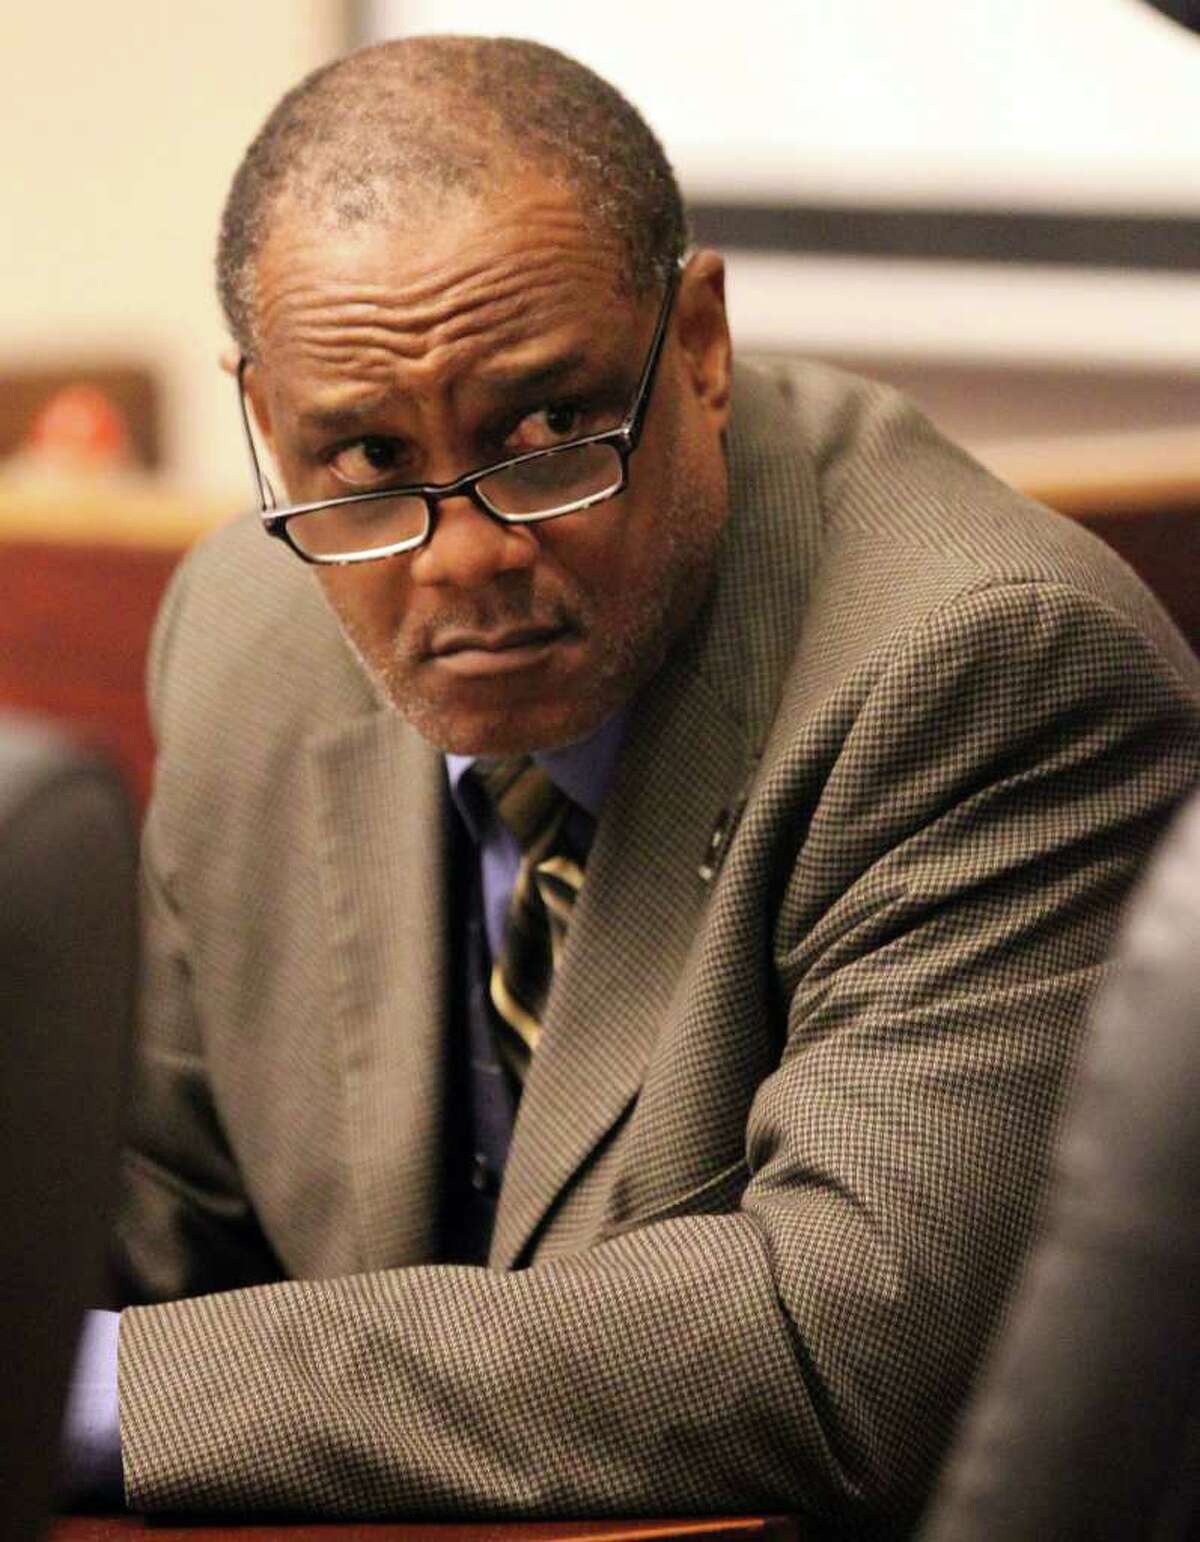 Former Bexar County Democratic Party treasurer Dwayne Adams is accused of embezzling about $200,000 from the party. His attorney blames another former party official.